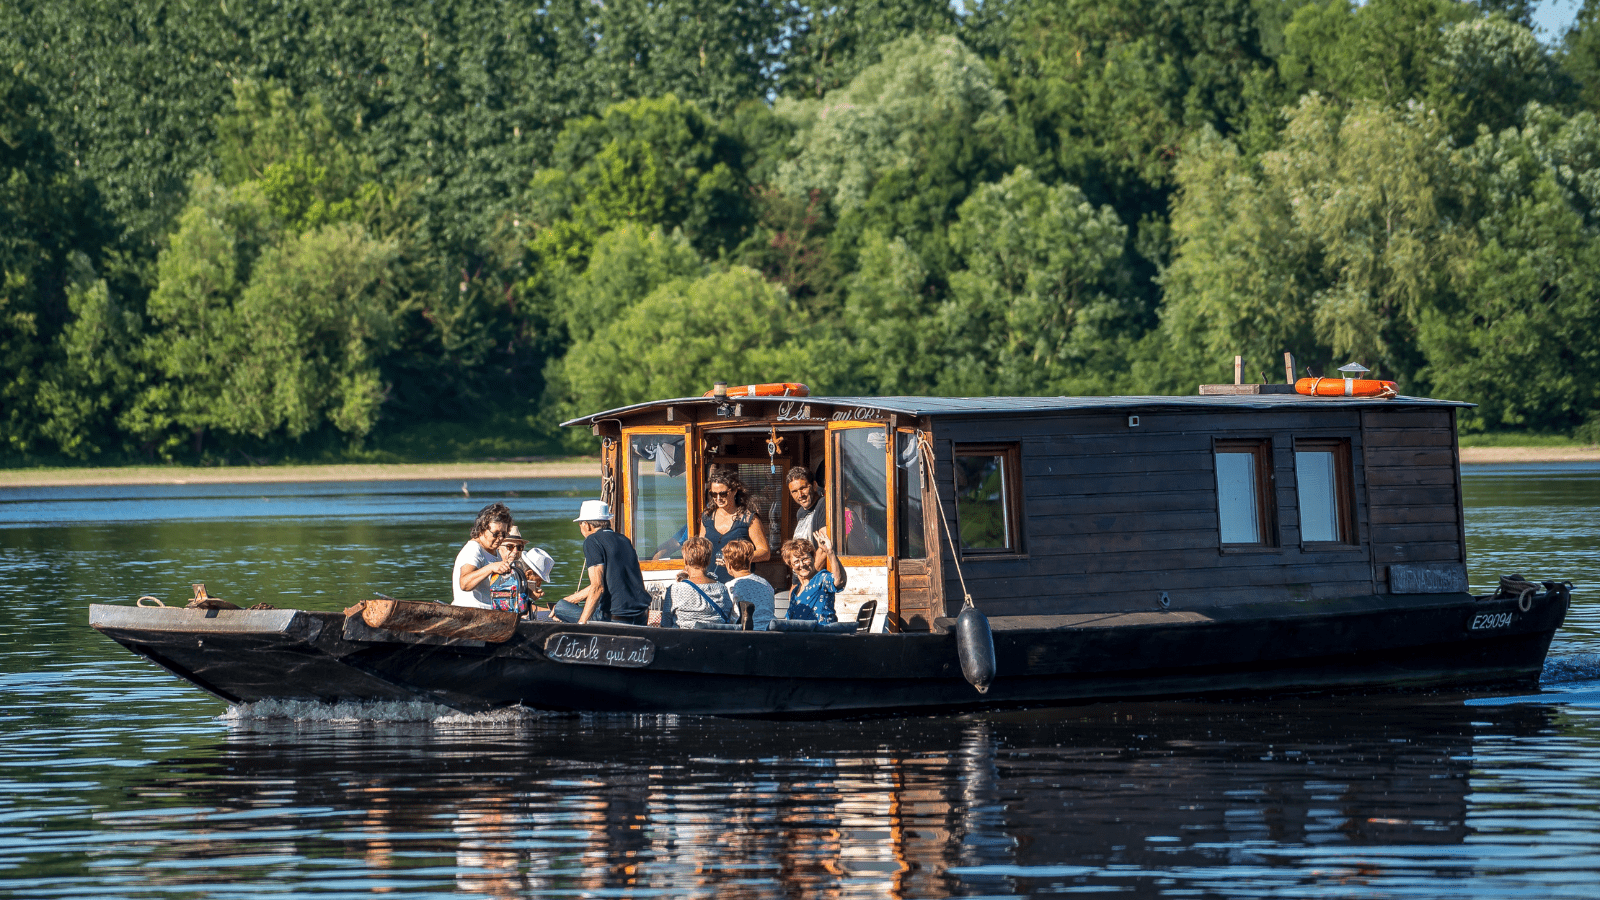 Boat on the Loire